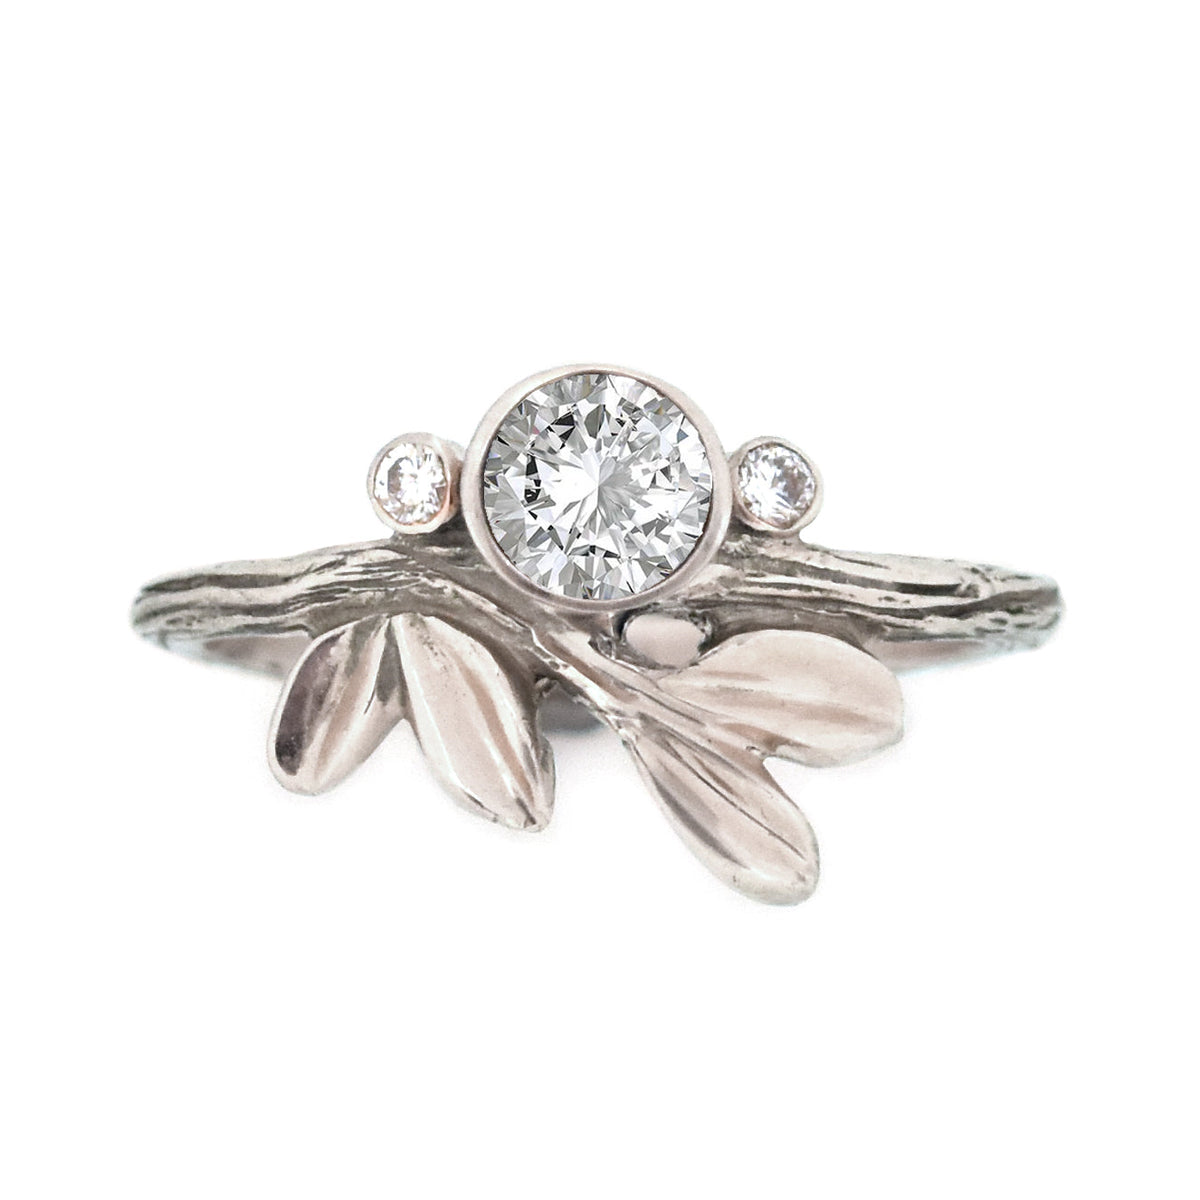 Gold Growing Love Diamond Twig Ring - your choice of 5mm stone & gold - Wedding Ring Moissanite / 18K Palladium White Gold Moissanite / 14K Rose Gold 6317 - handmade by Beth Millner Jewelry